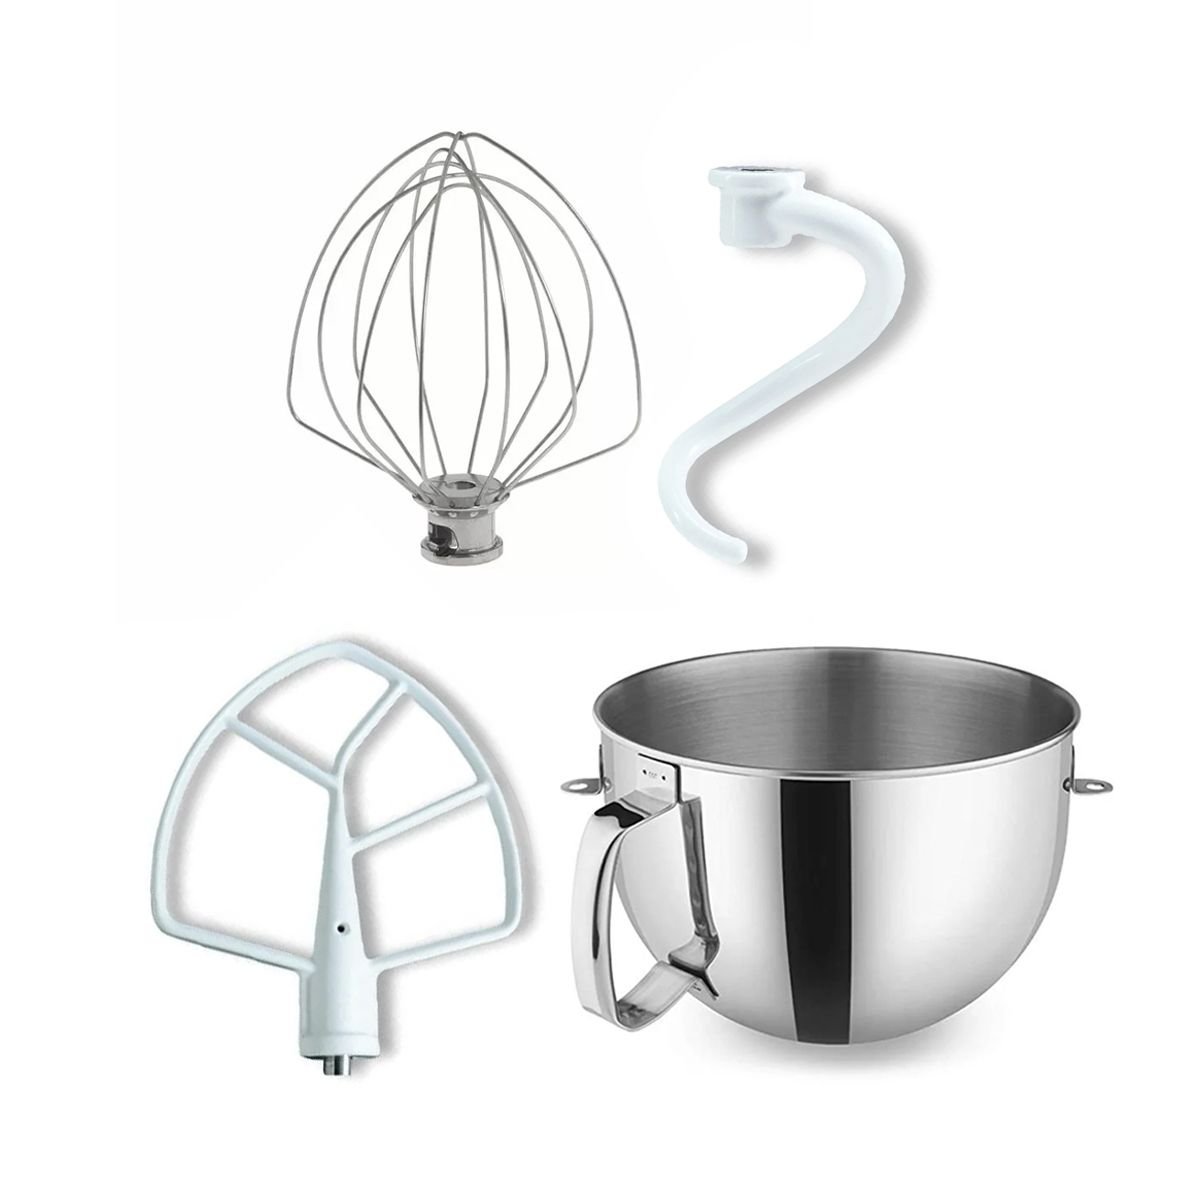 6-Quart Stainless Steel Bowl + Coated Pastry Beater Accessory Pack, KitchenAid